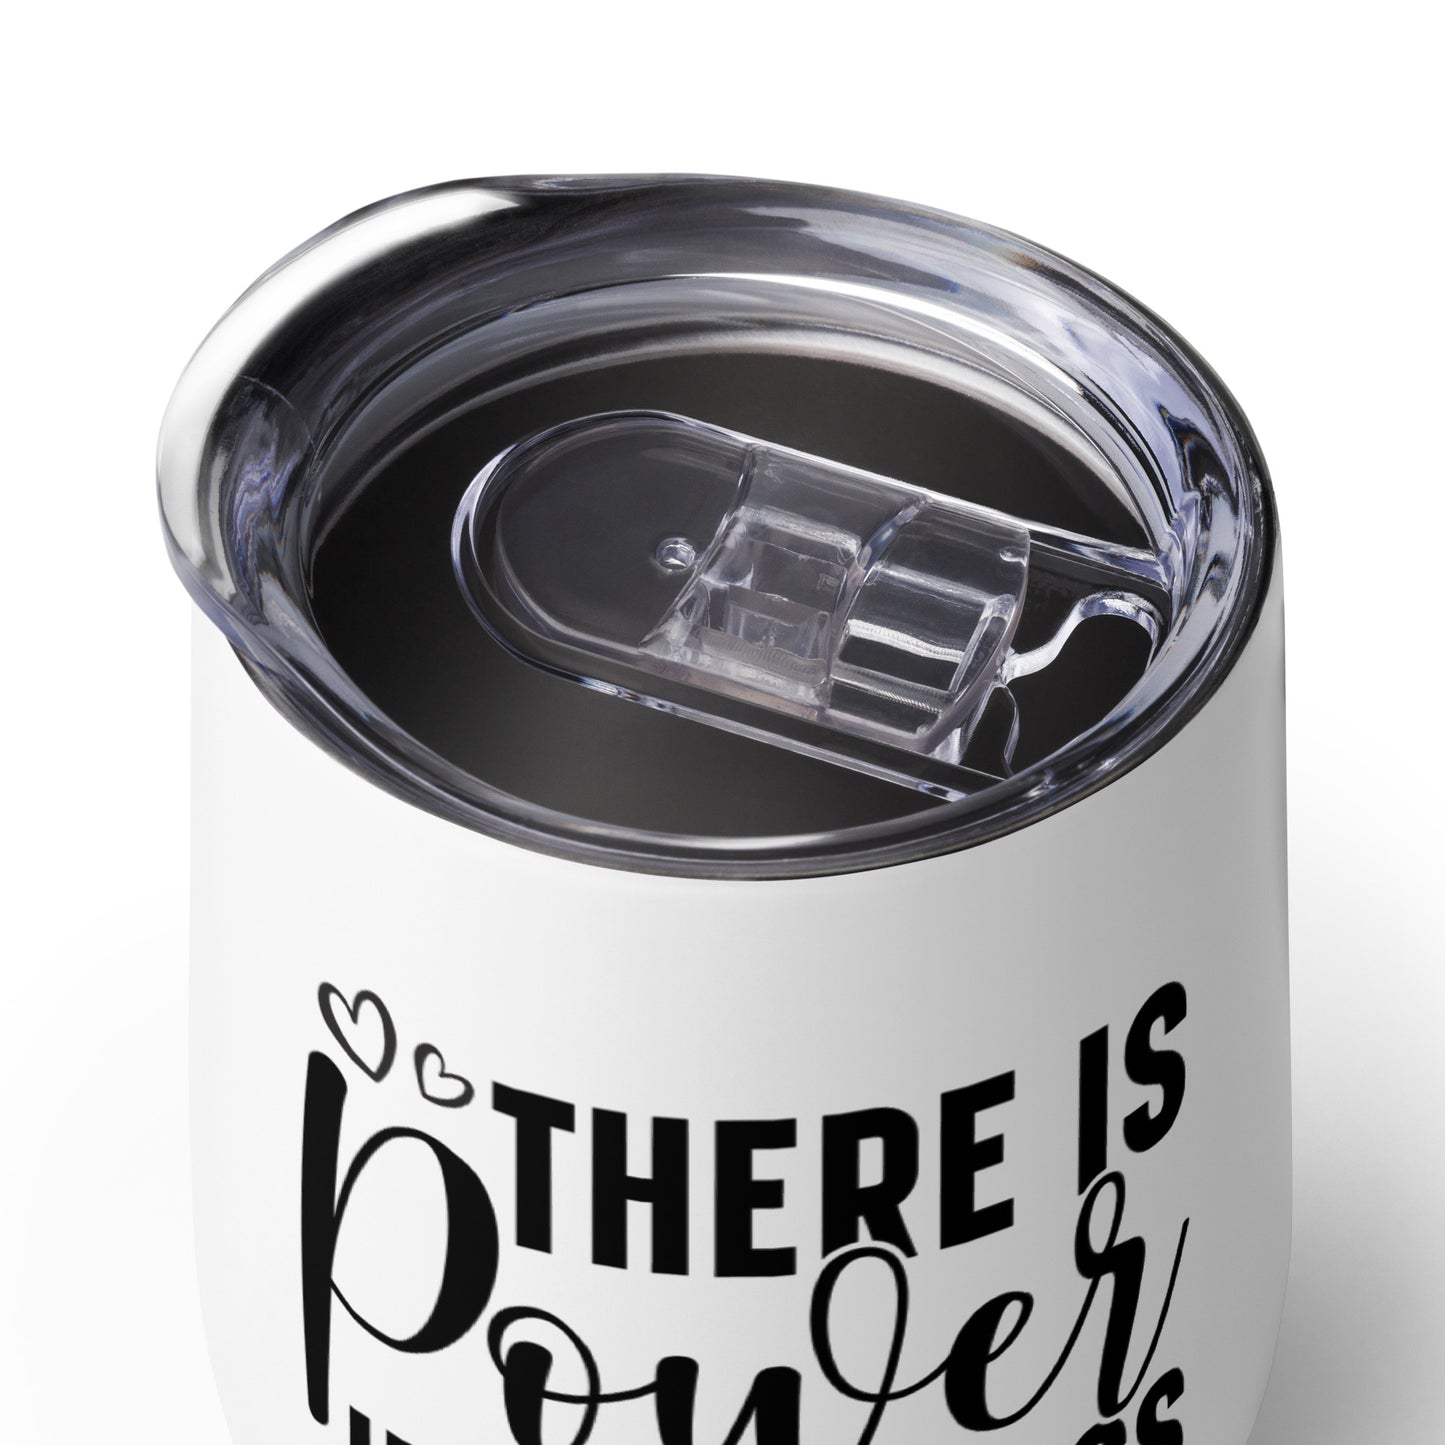 Wine tumbler - There is Power In Kindness